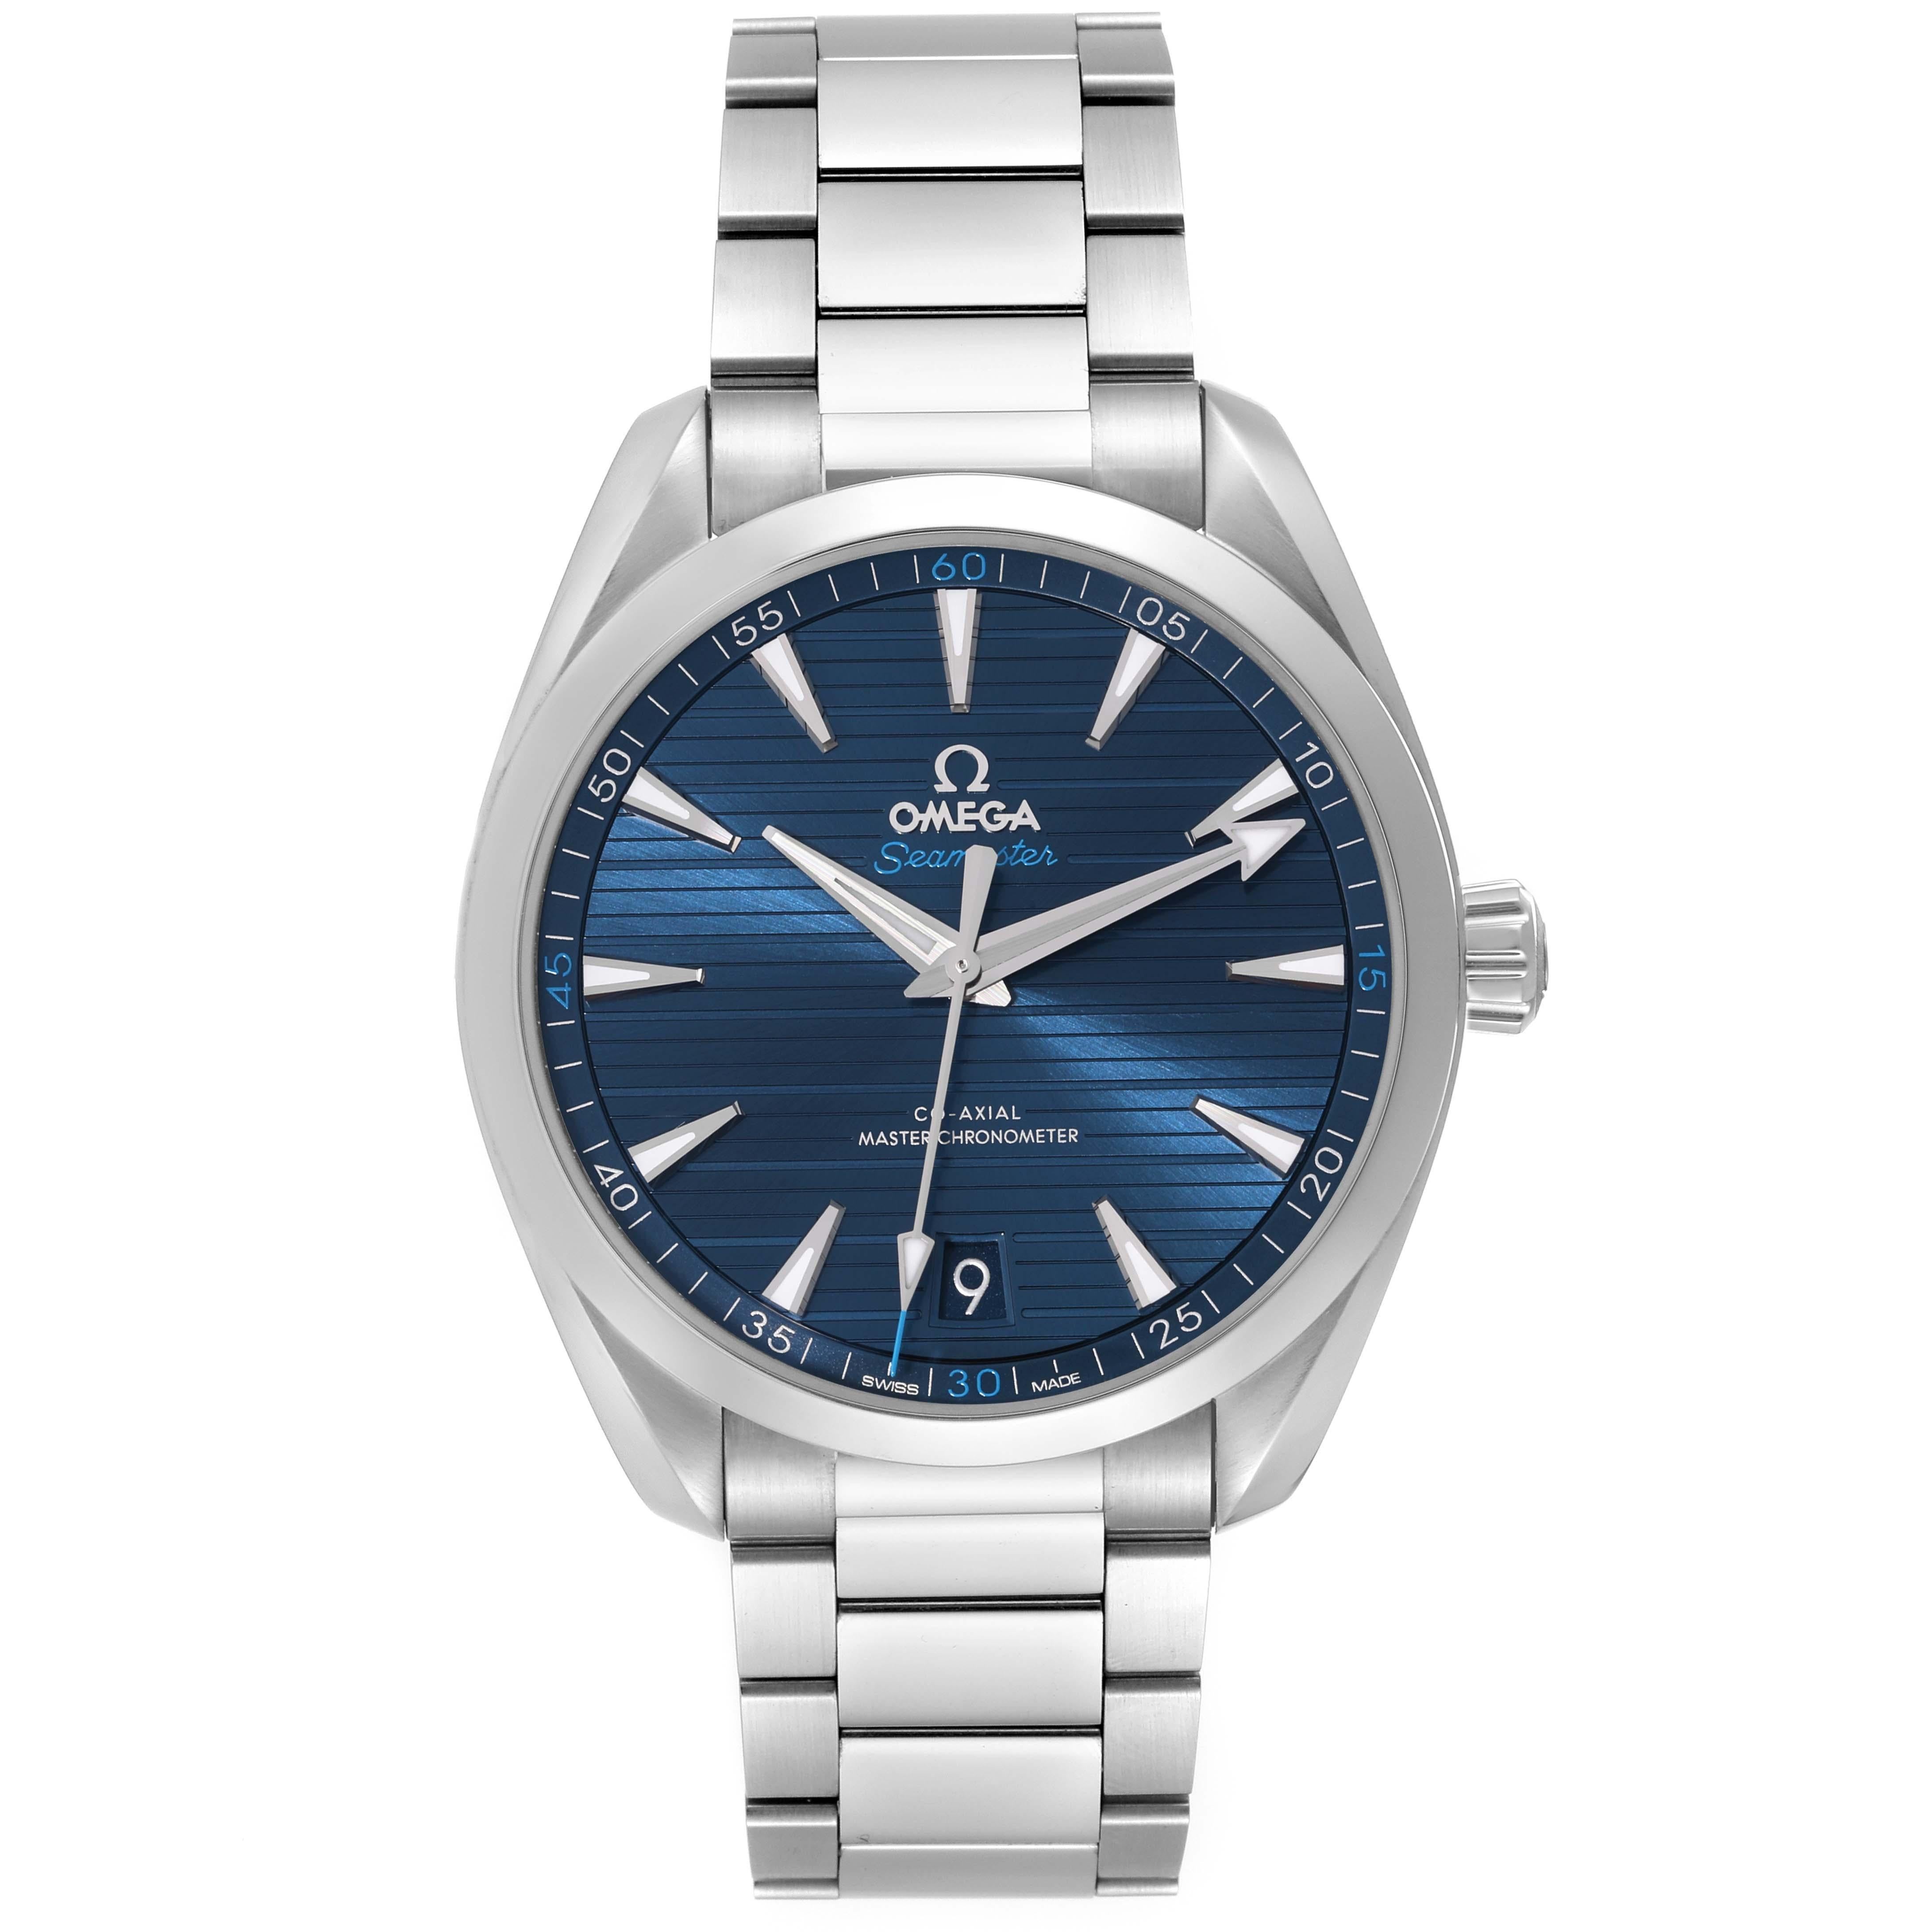 Omega Seamaster Aqua Terra Blue Dial Steel Mens Watch 220.10.41.21.03.001 Card. Automatic self-winding movement. Stainless steel round case 41.0 mm in diameter. Case thickness 13.2. Transparent exhibition sapphire crystal caseback. Stainless steel